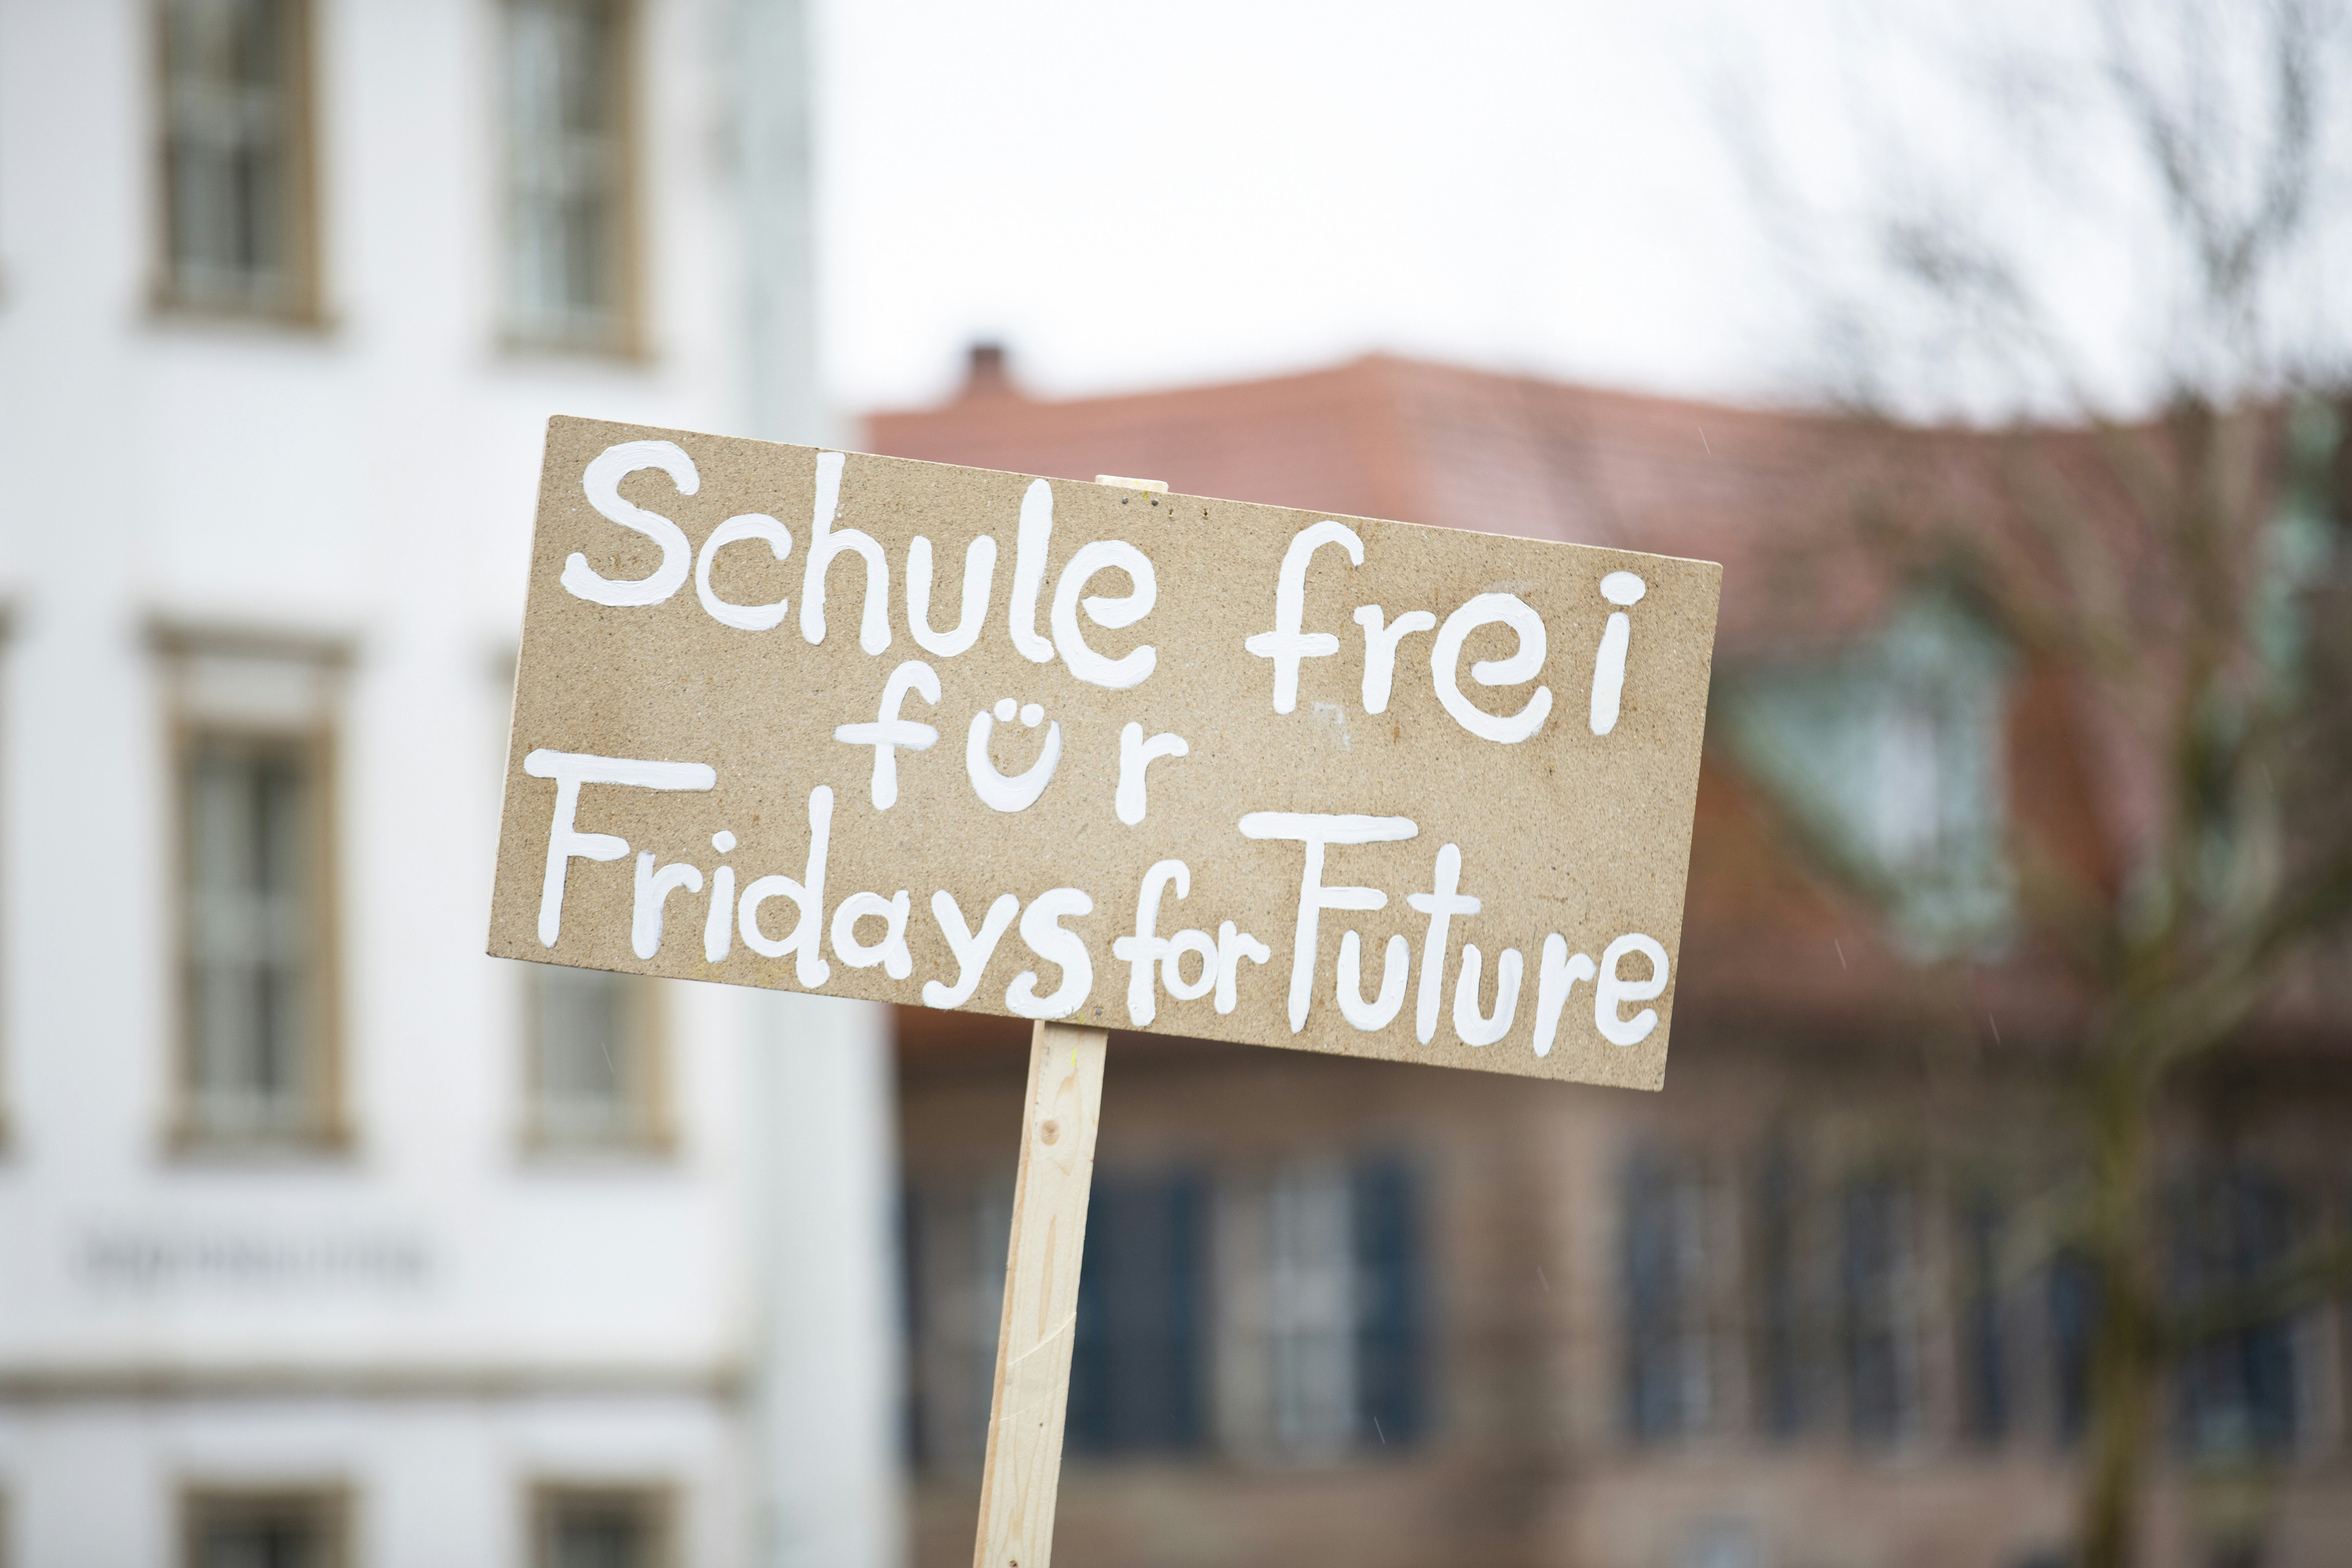 Save our Planet - Fridays for future (March 15 2019)